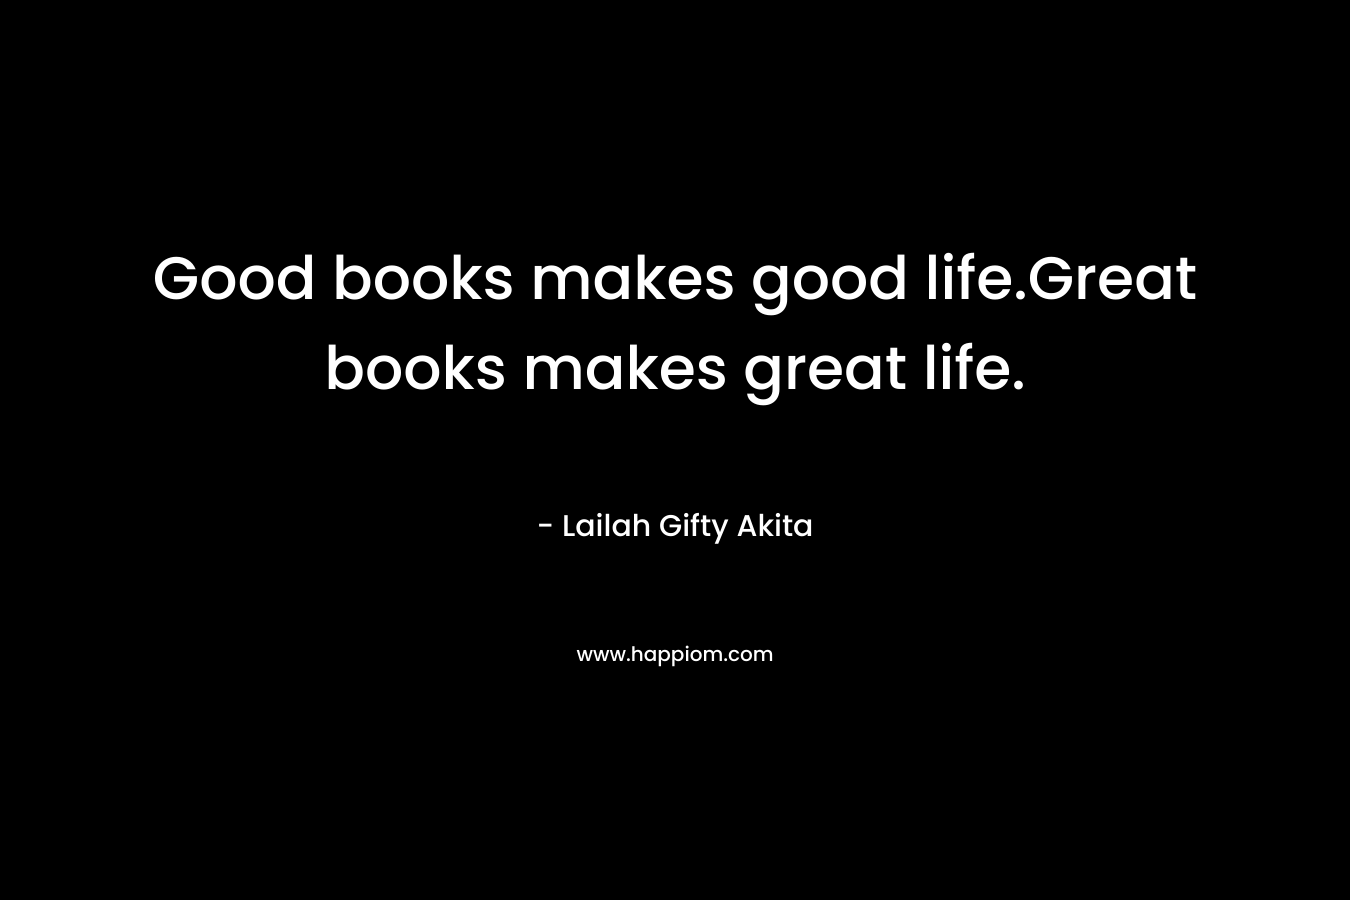 Good books makes good life.Great books makes great life.